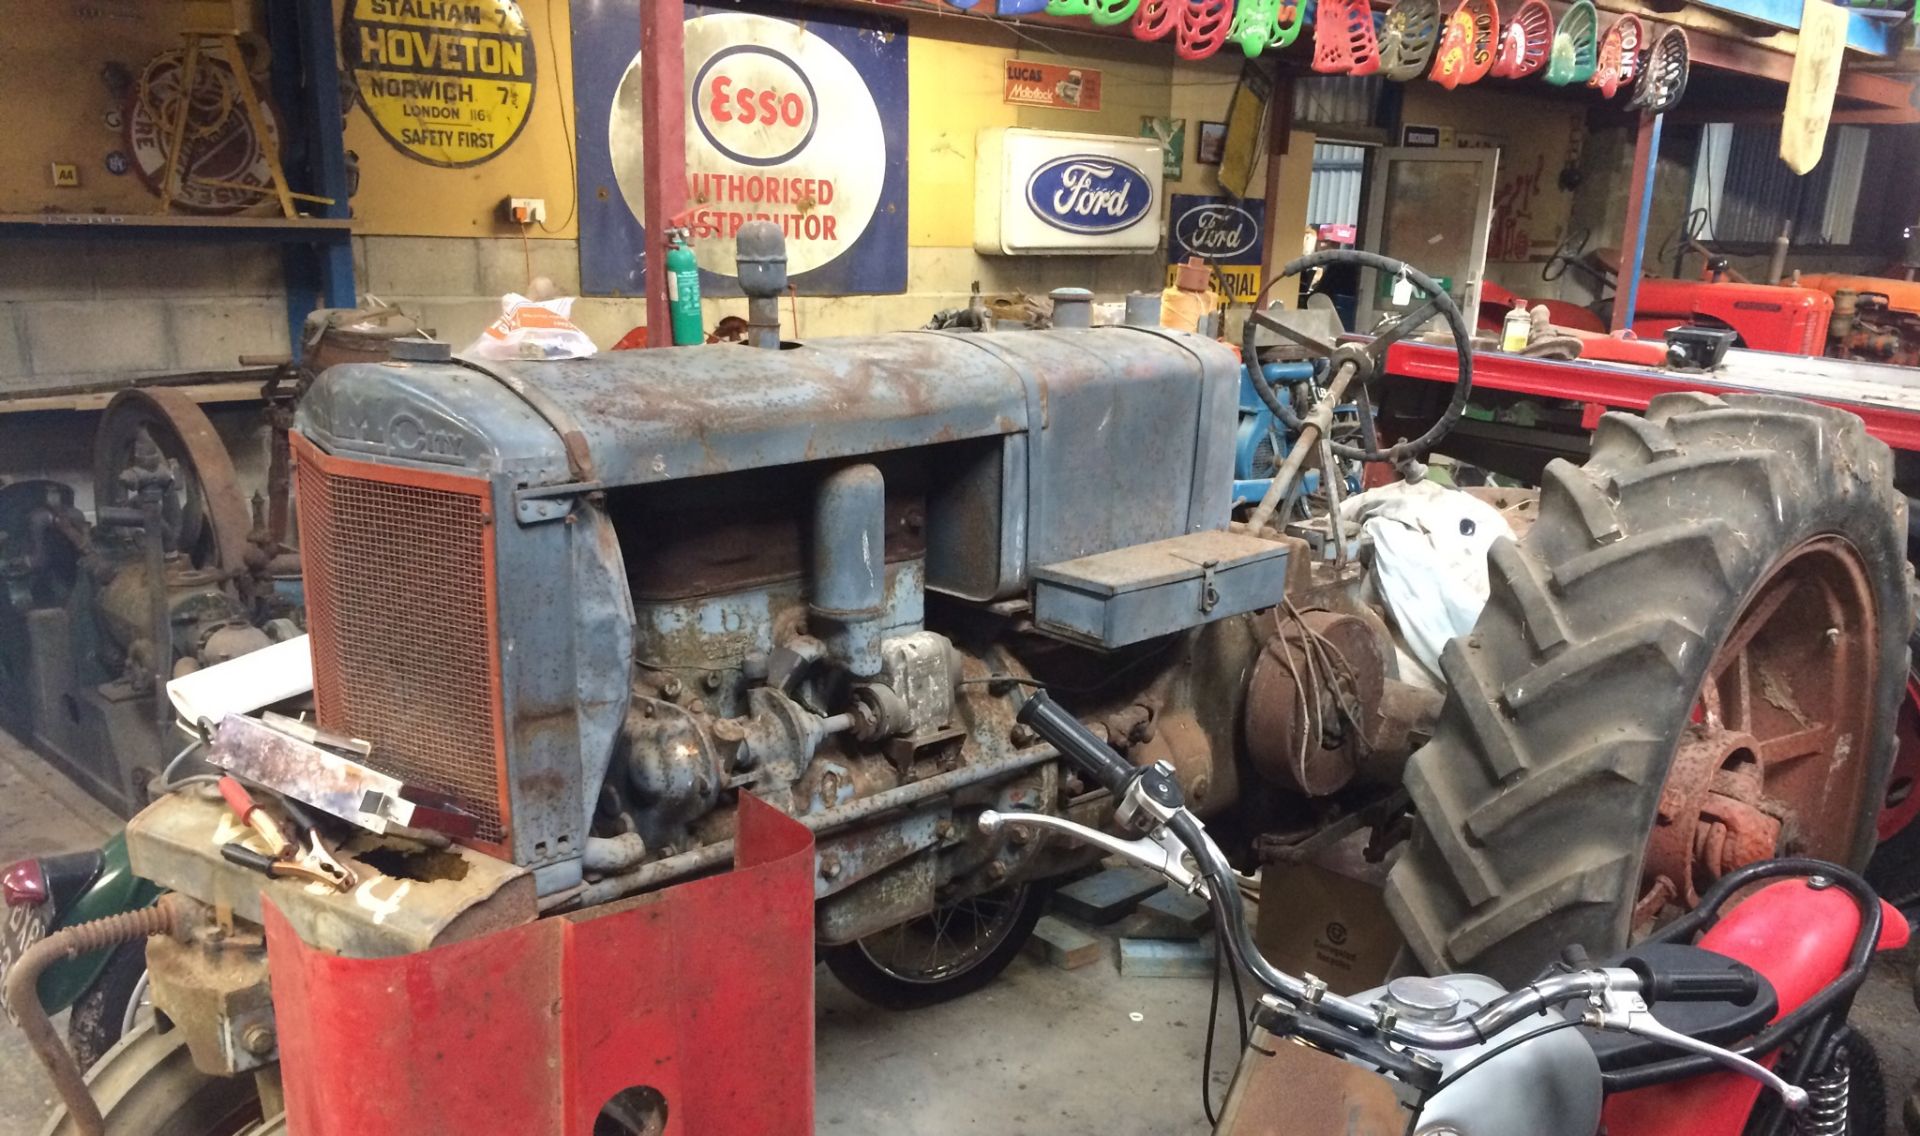 Twin City Tractor - incomplete restoration project. - Image 5 of 5